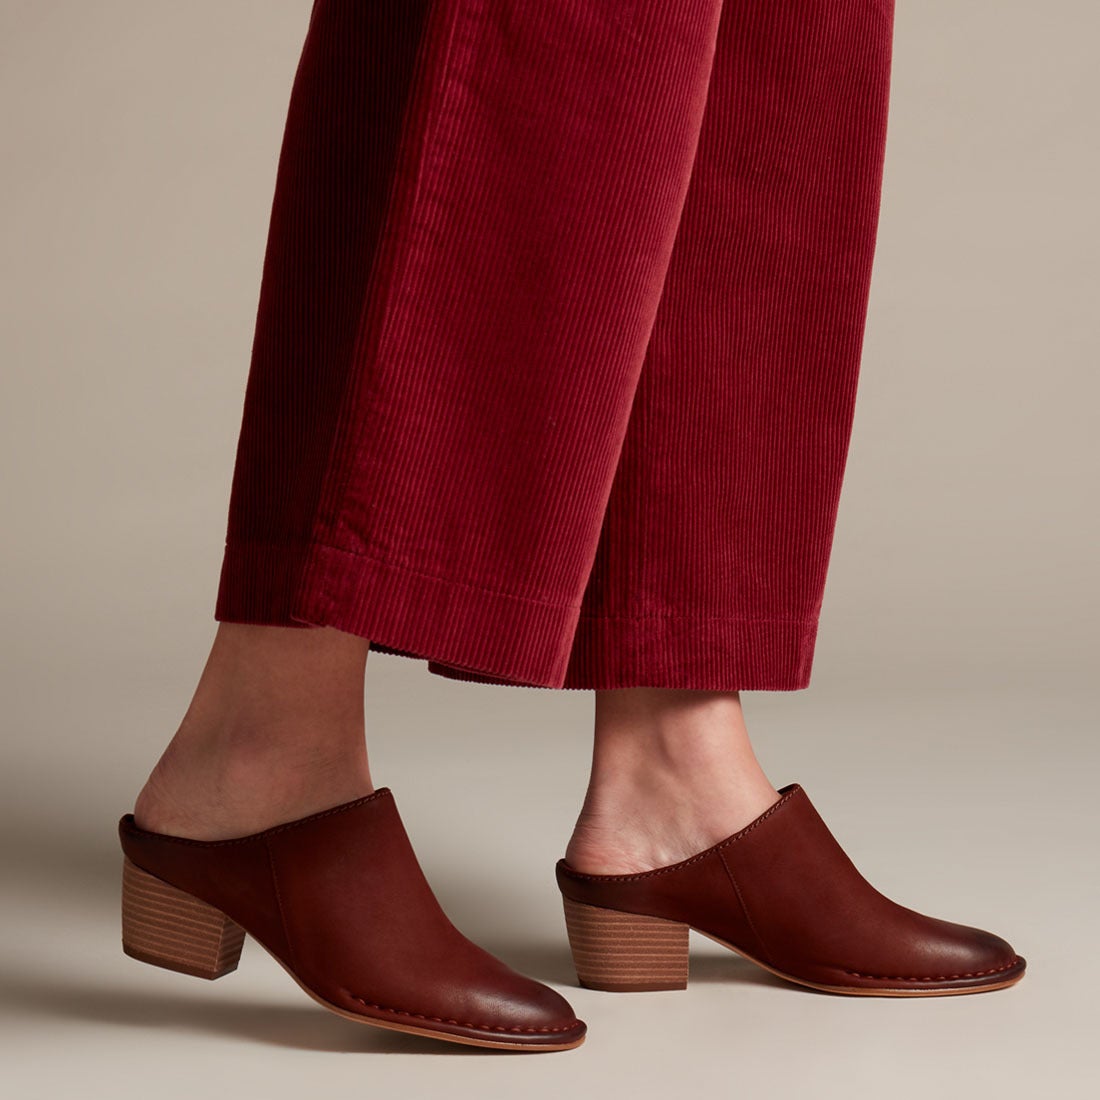 clarks spiced isla off 62% - online-sms.in